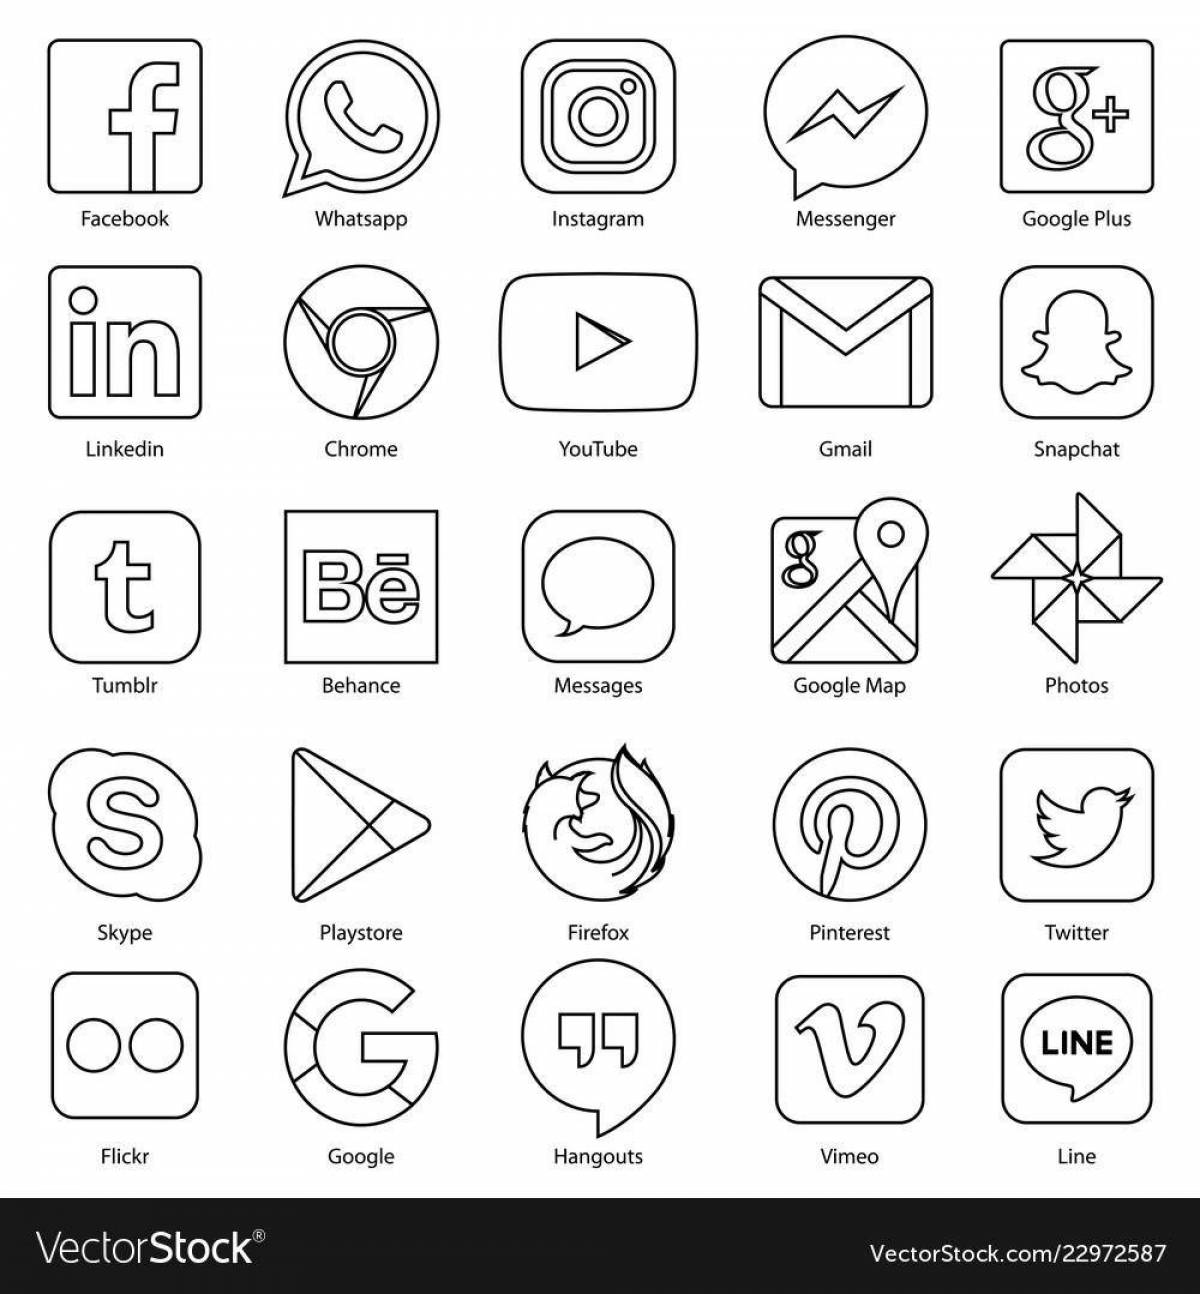 Animated coloring pages with social media logos